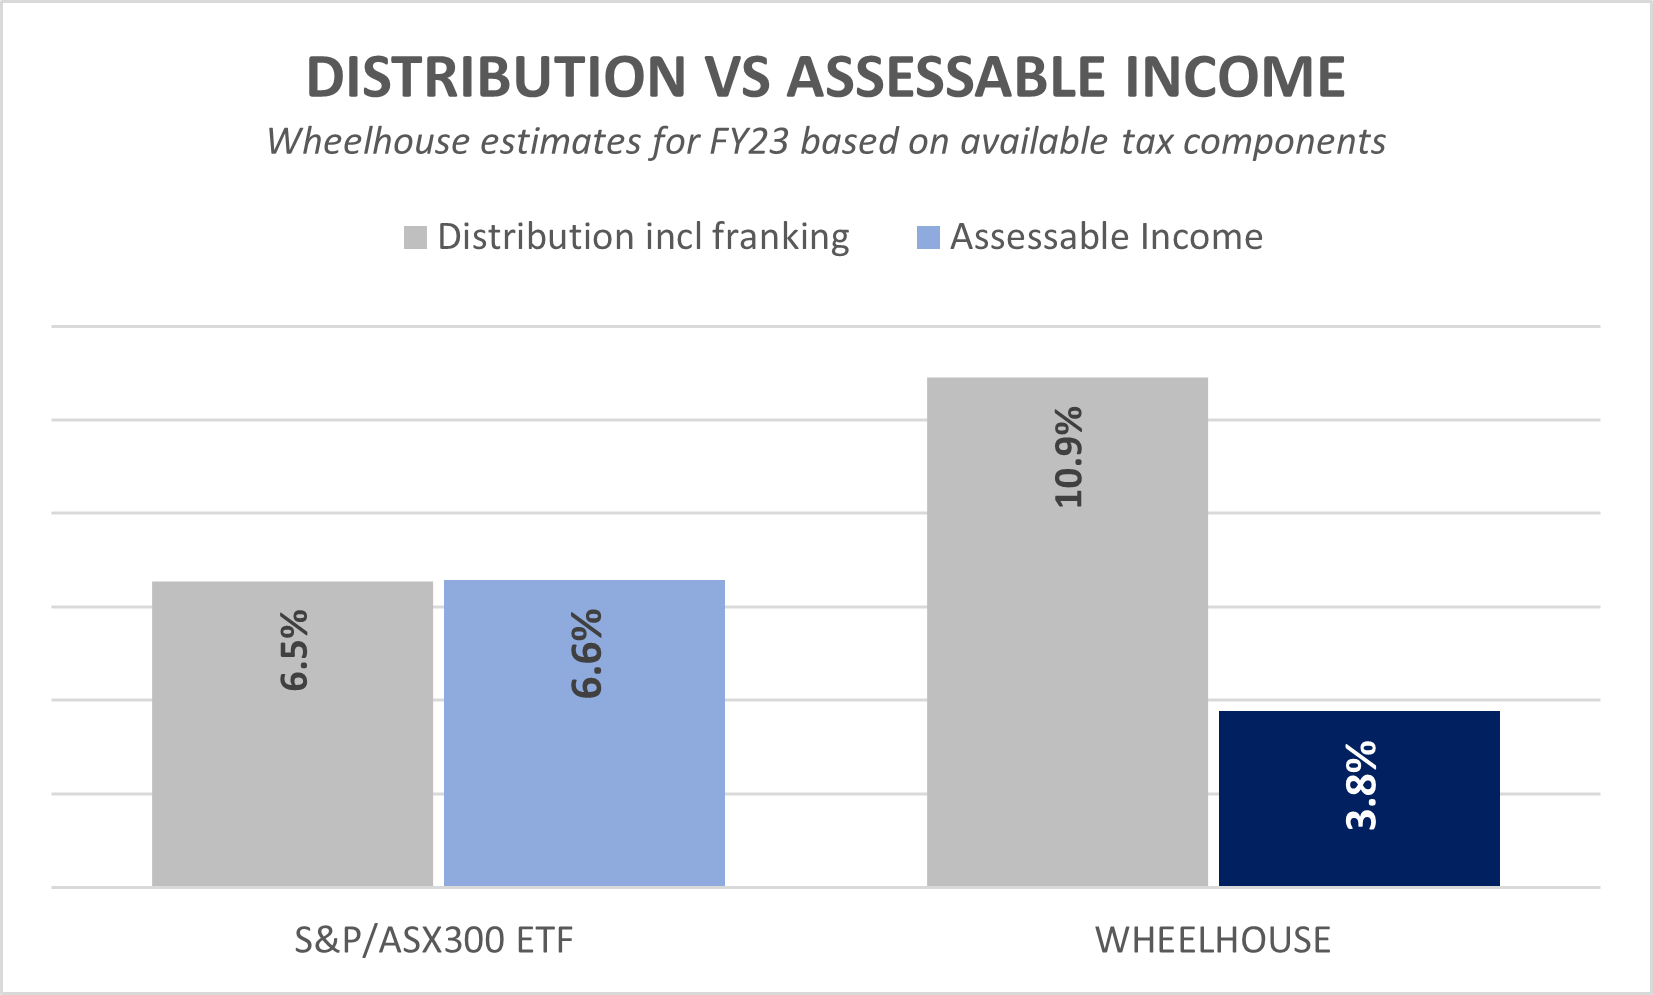 Source: Wheelhouse. Estimates are based upon available tax components. The example provided is hypothetical and may differ to actual taxation impact for different investors.